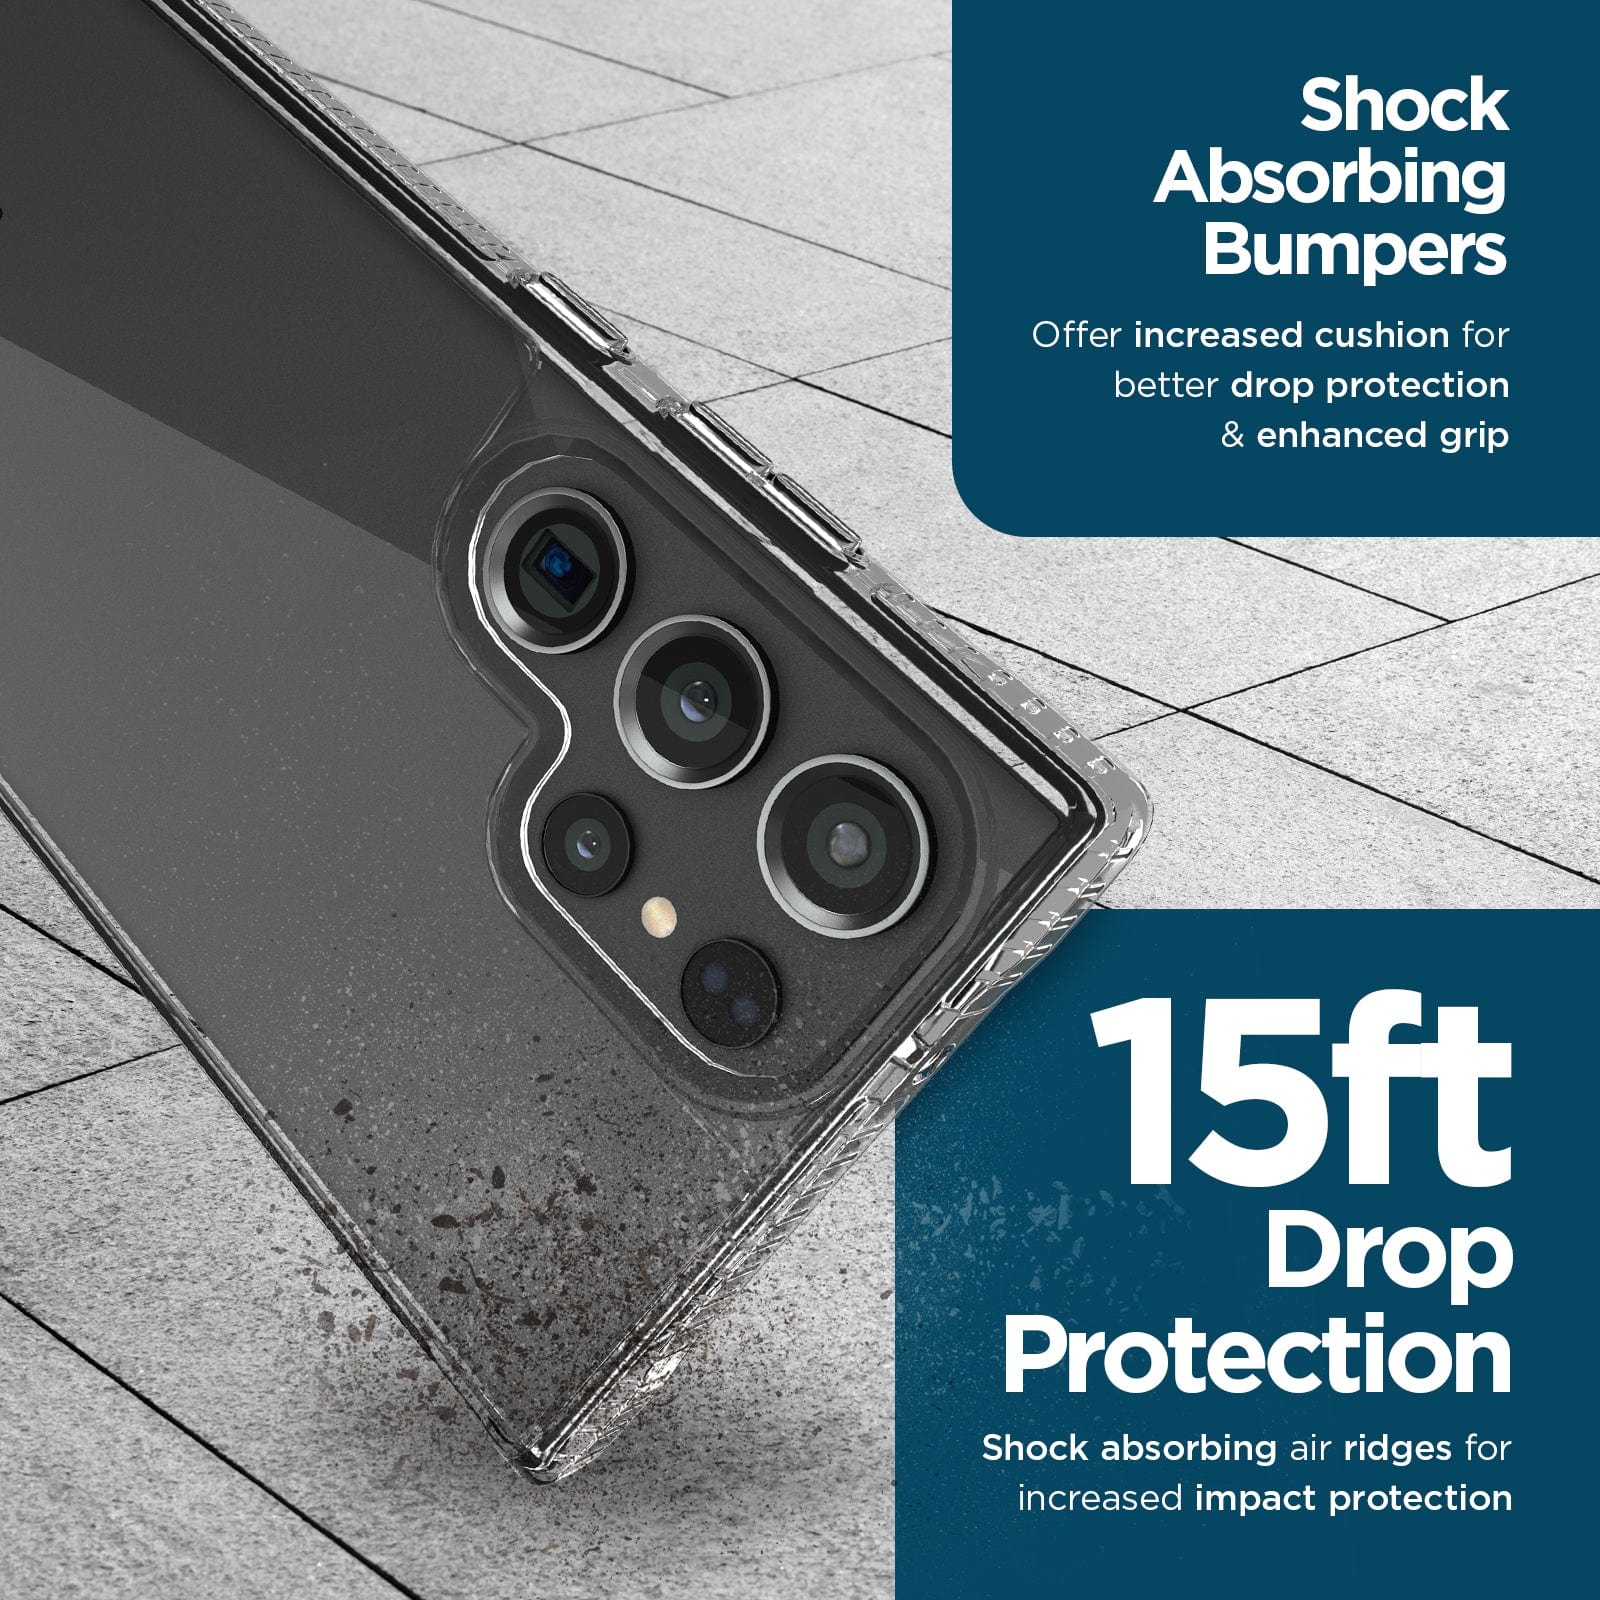 SHOCK ABSORBING BUMPERS. OFFER INCREASED CUSHION FOR BETTER DROP PROTECTION & ENHANCED GRIP. 15FT DROP PROTECTION. SHOCK ABSORBING AIR RIDGES FOR INCREASED IMPACT PROTECTION.